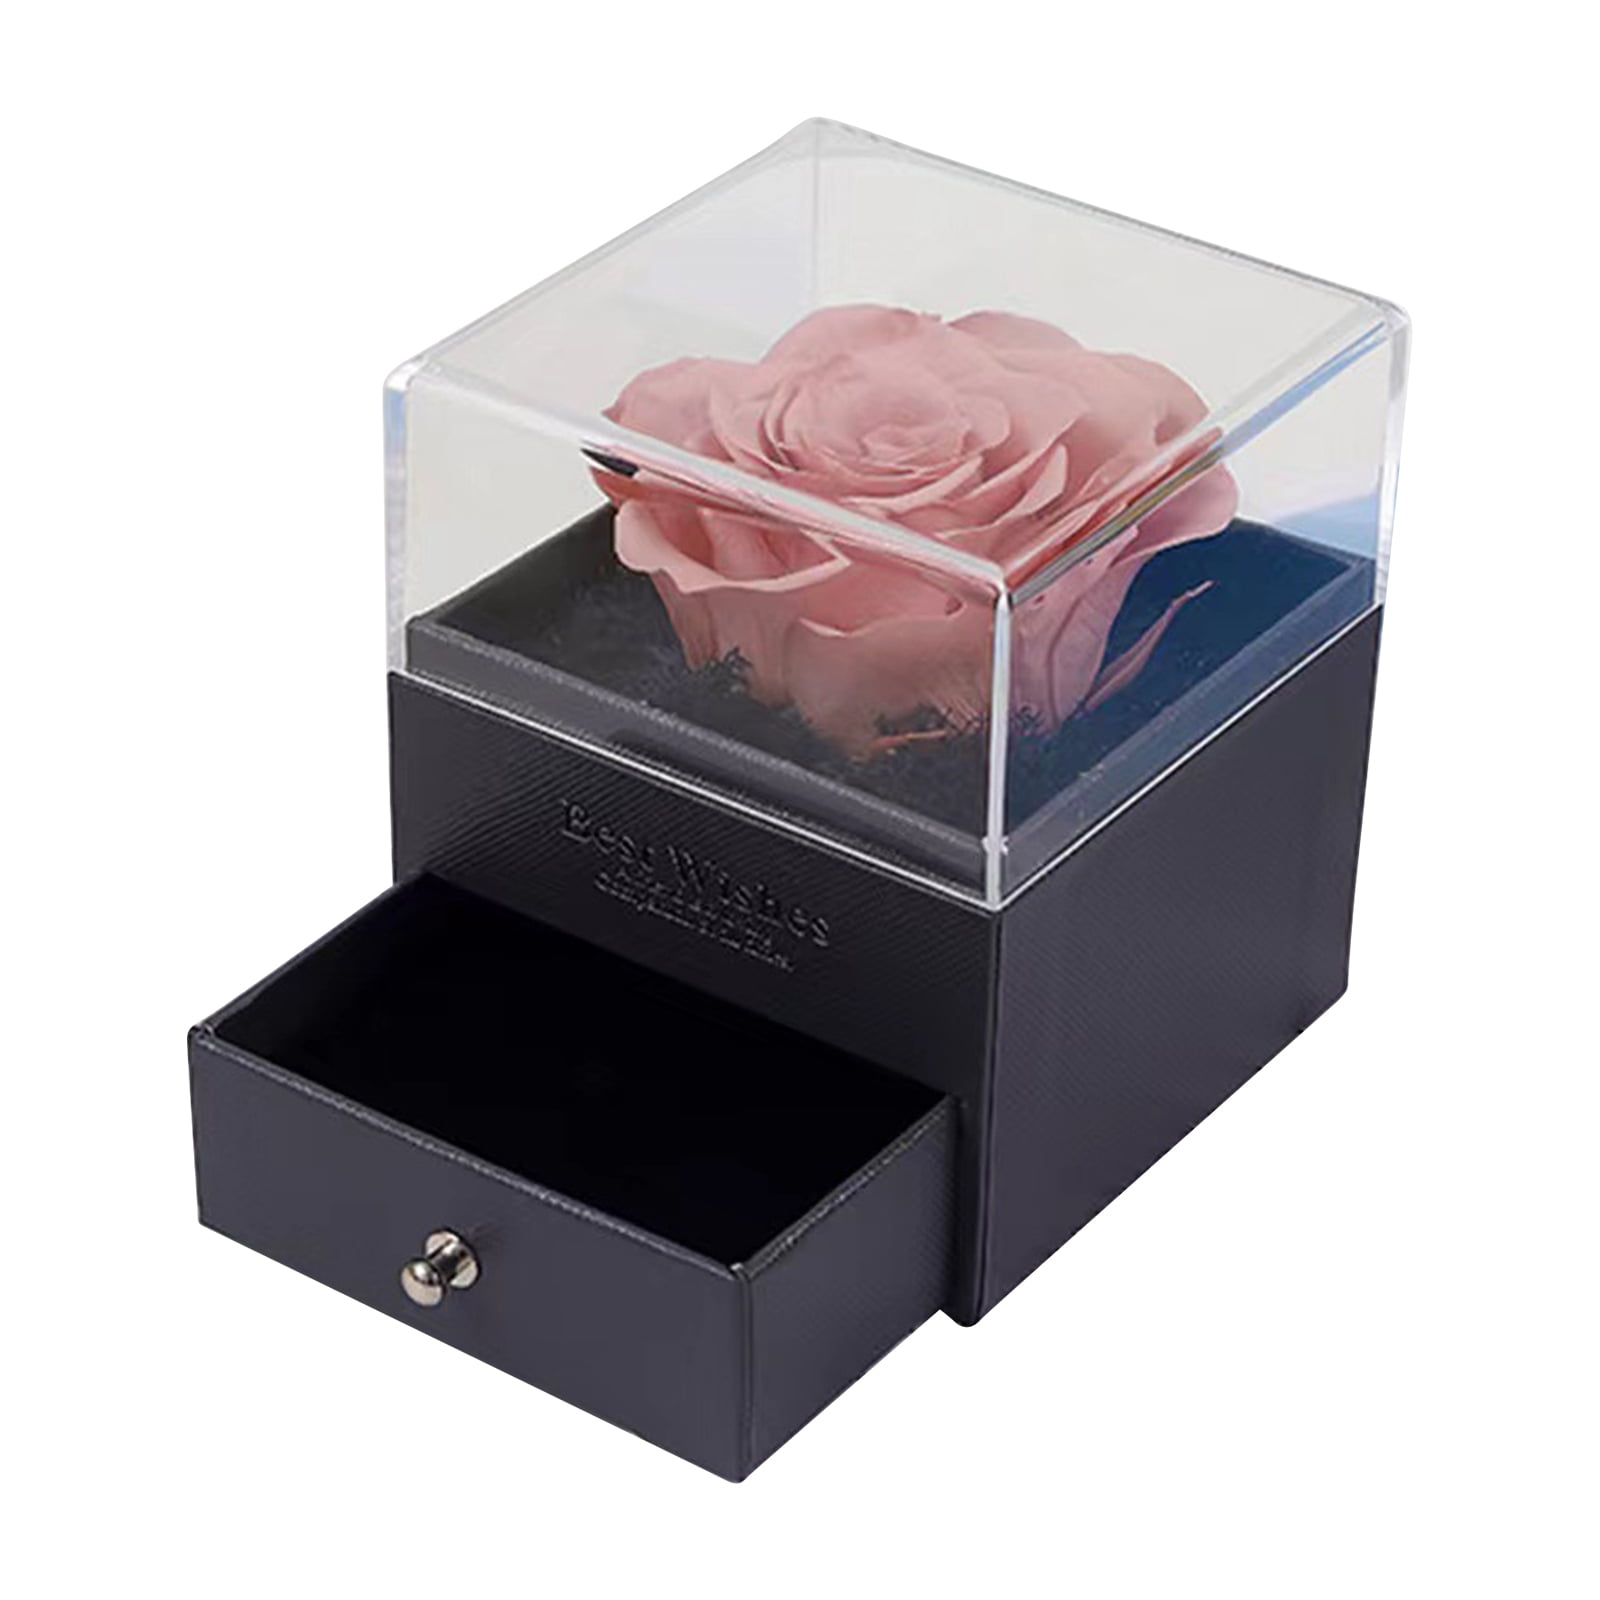 P007 - Luxurious Acrylic Heart Box with Preserved Pink Roses - Love Flowers  Miami